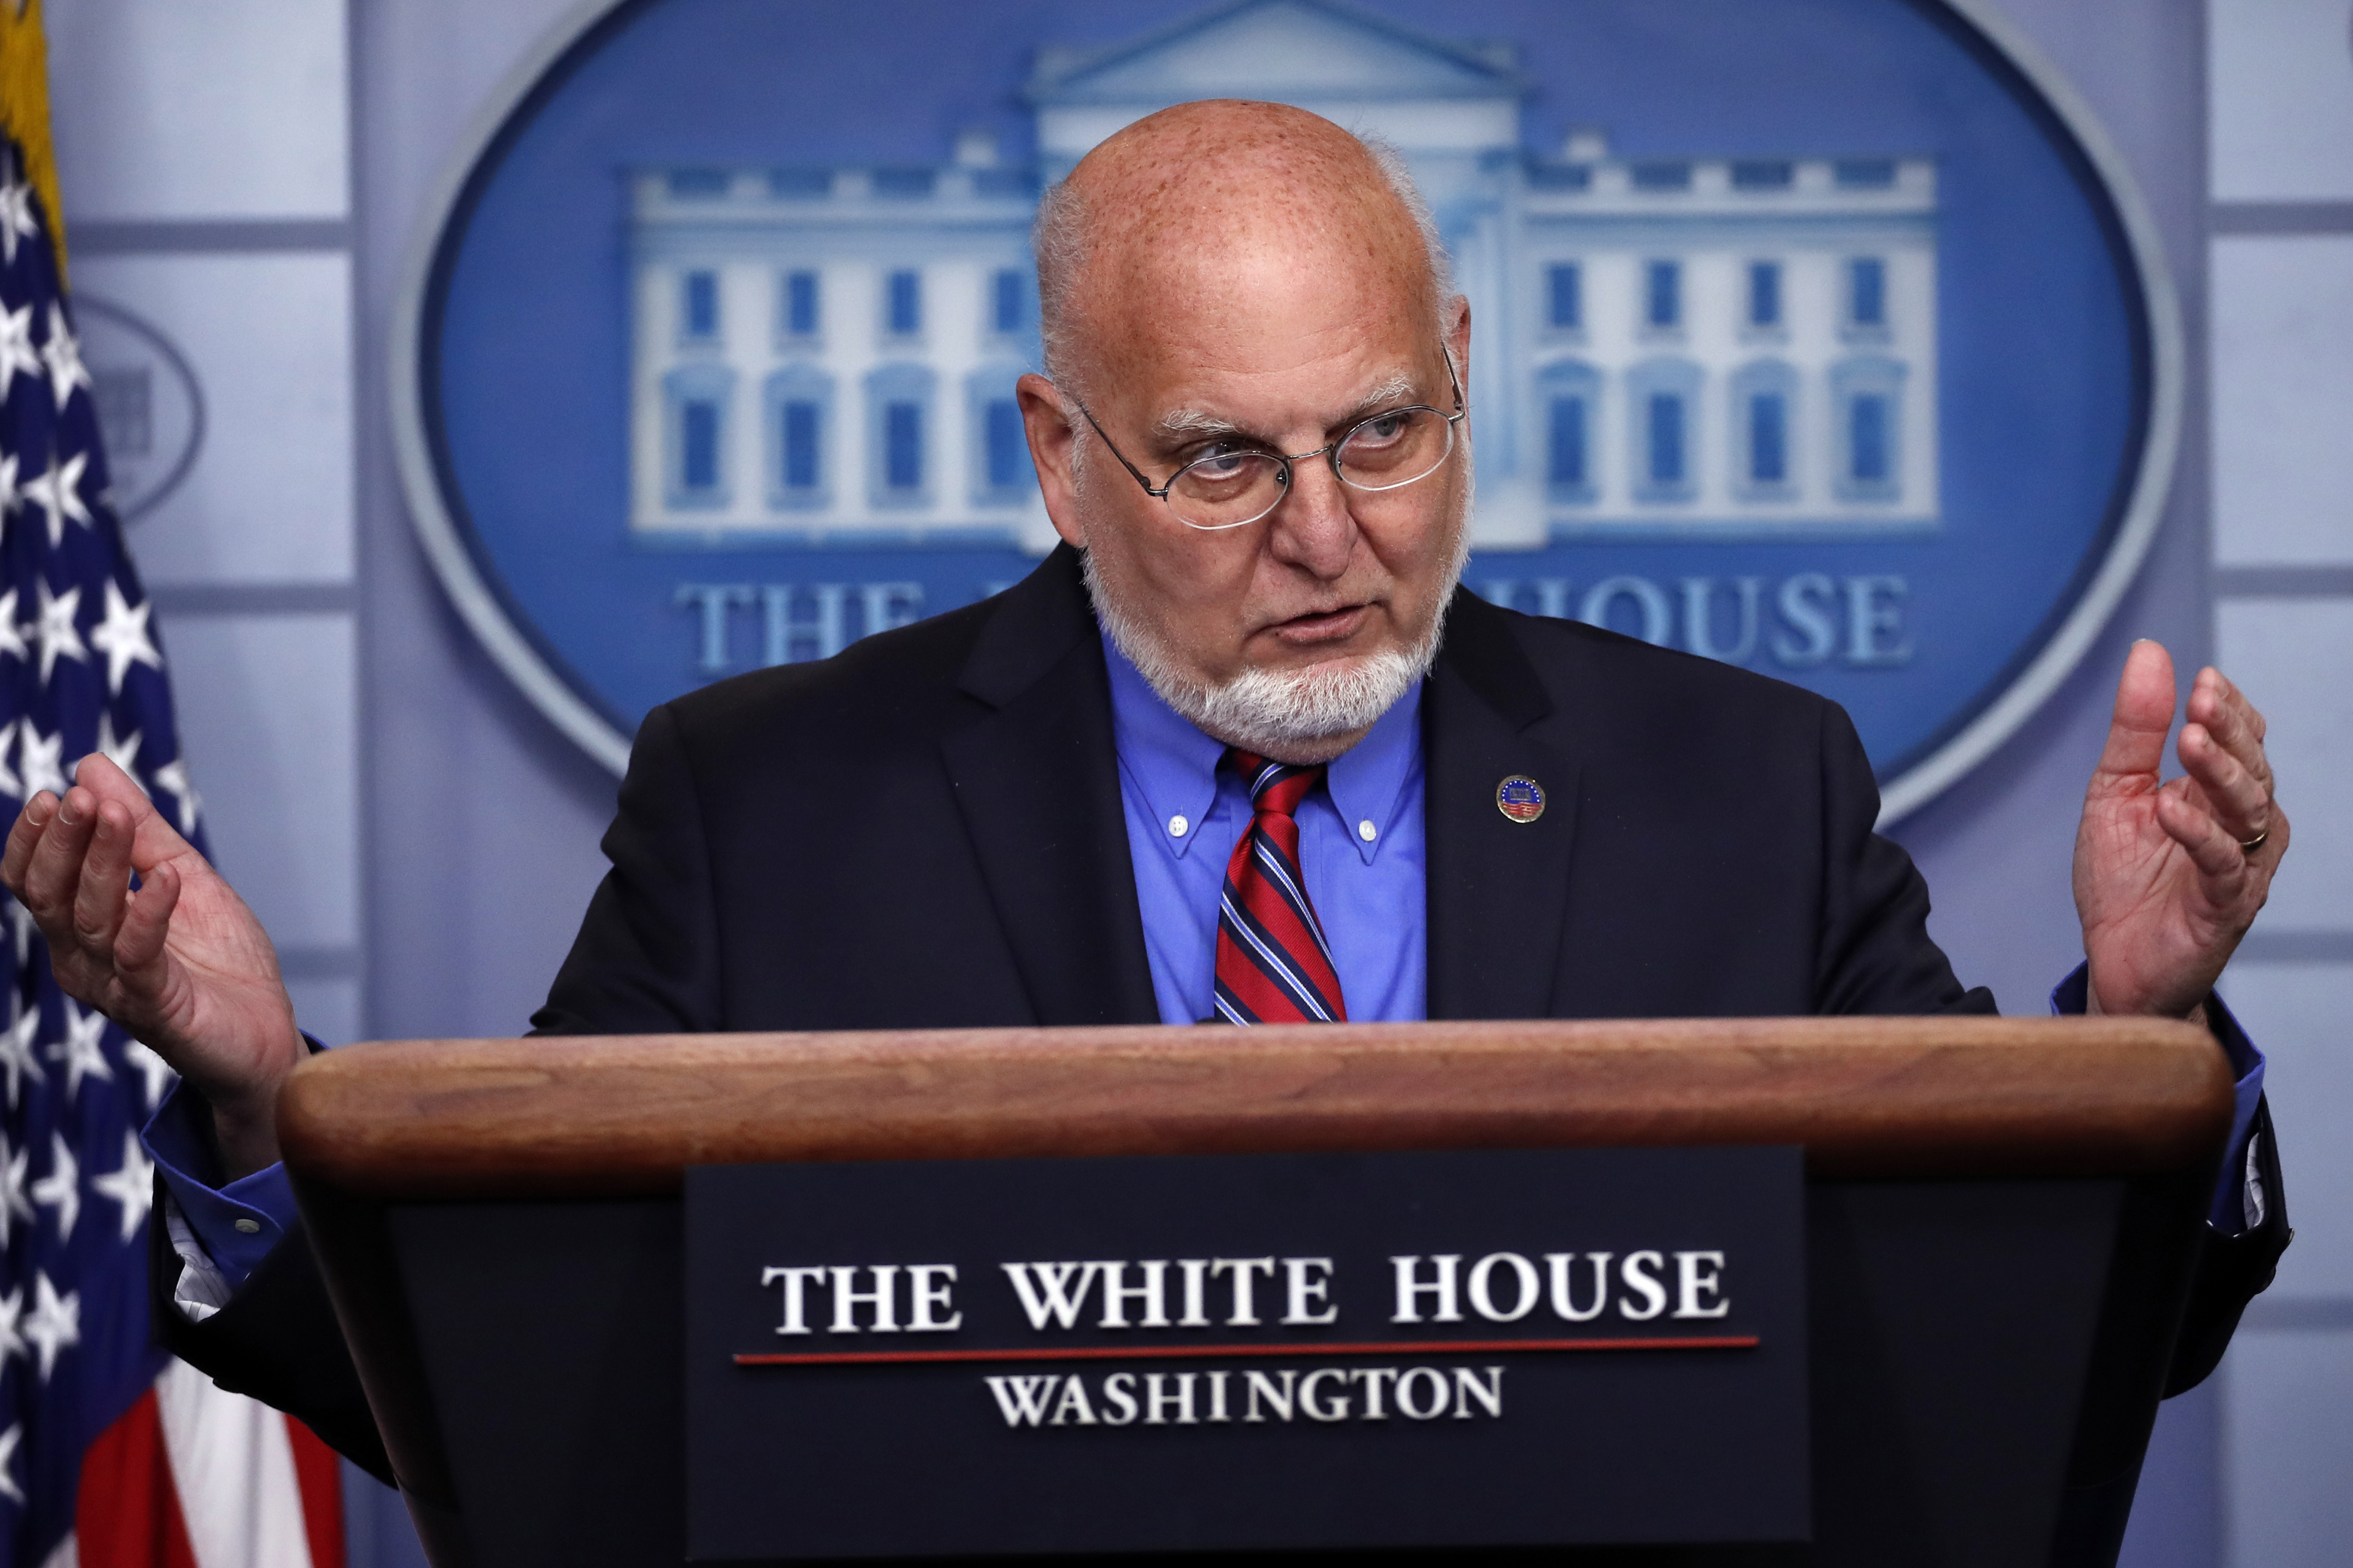 Dr. Robert Redfield, director of the Centers for Disease Control and Prevention, speaks about the coronavirus in the James Brady Press Briefing Room of the White House in Washington on April 22, 2020. (Alex Brandon—AP)